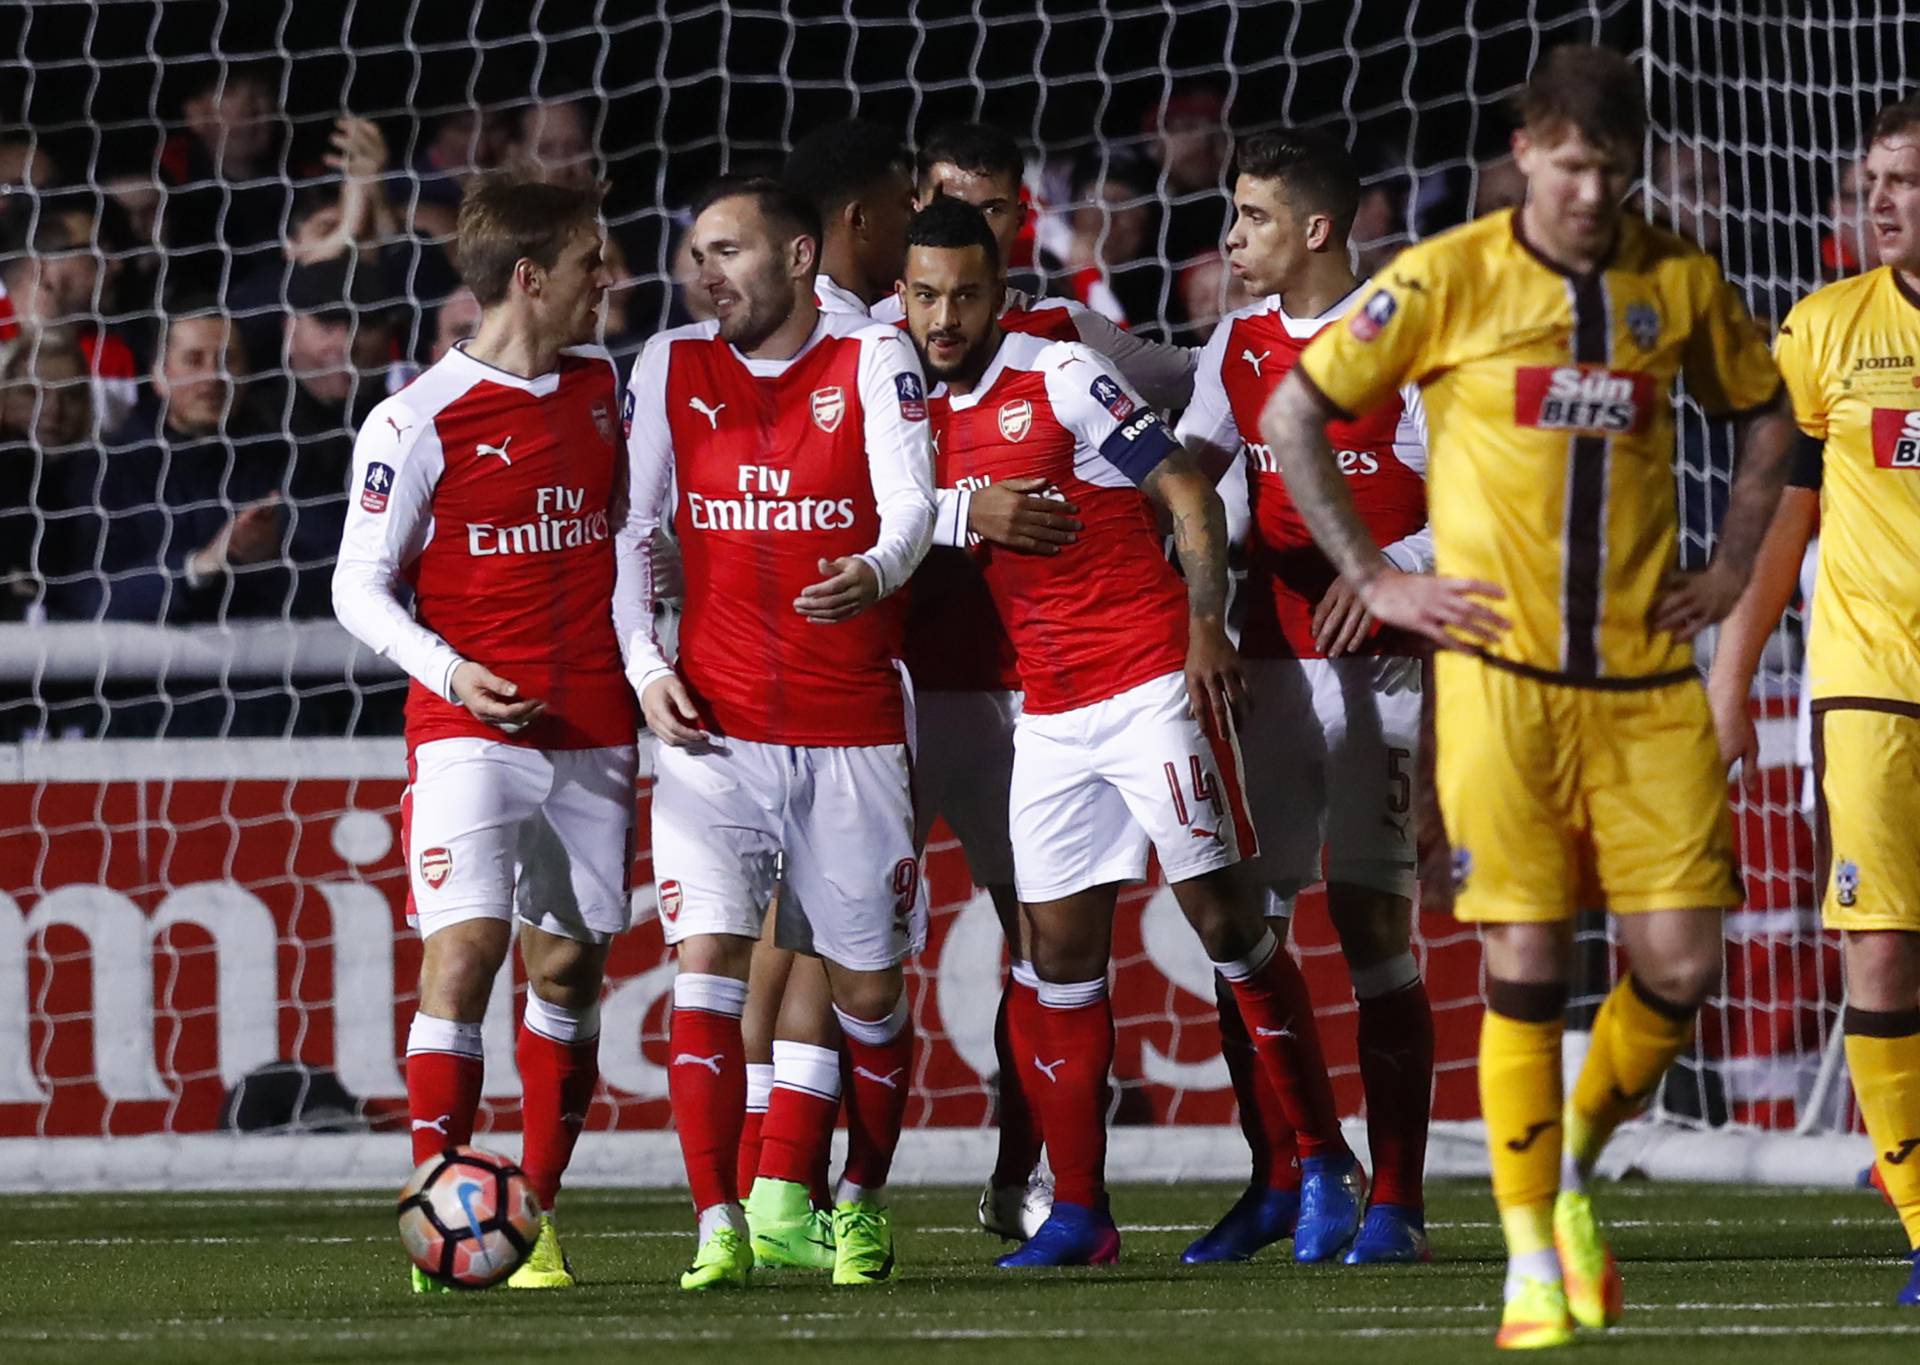 Arsenal's Theo Walcott celebrates scoring their second goal with Nacho Monreal, Lucas Perez and Gabriel Paulista as Sutton United's Jamie Collins looks dejected